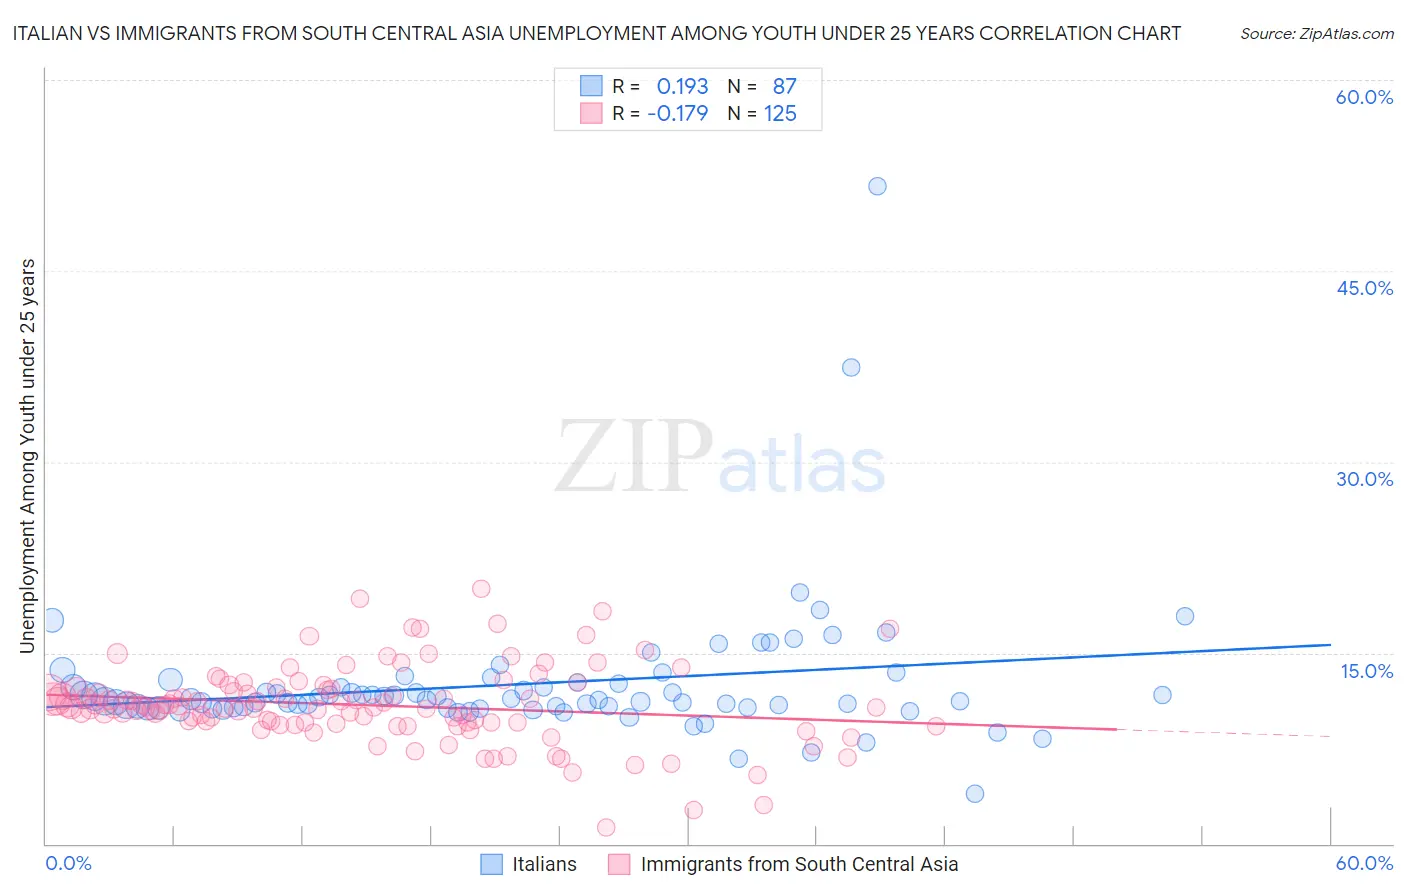 Italian vs Immigrants from South Central Asia Unemployment Among Youth under 25 years